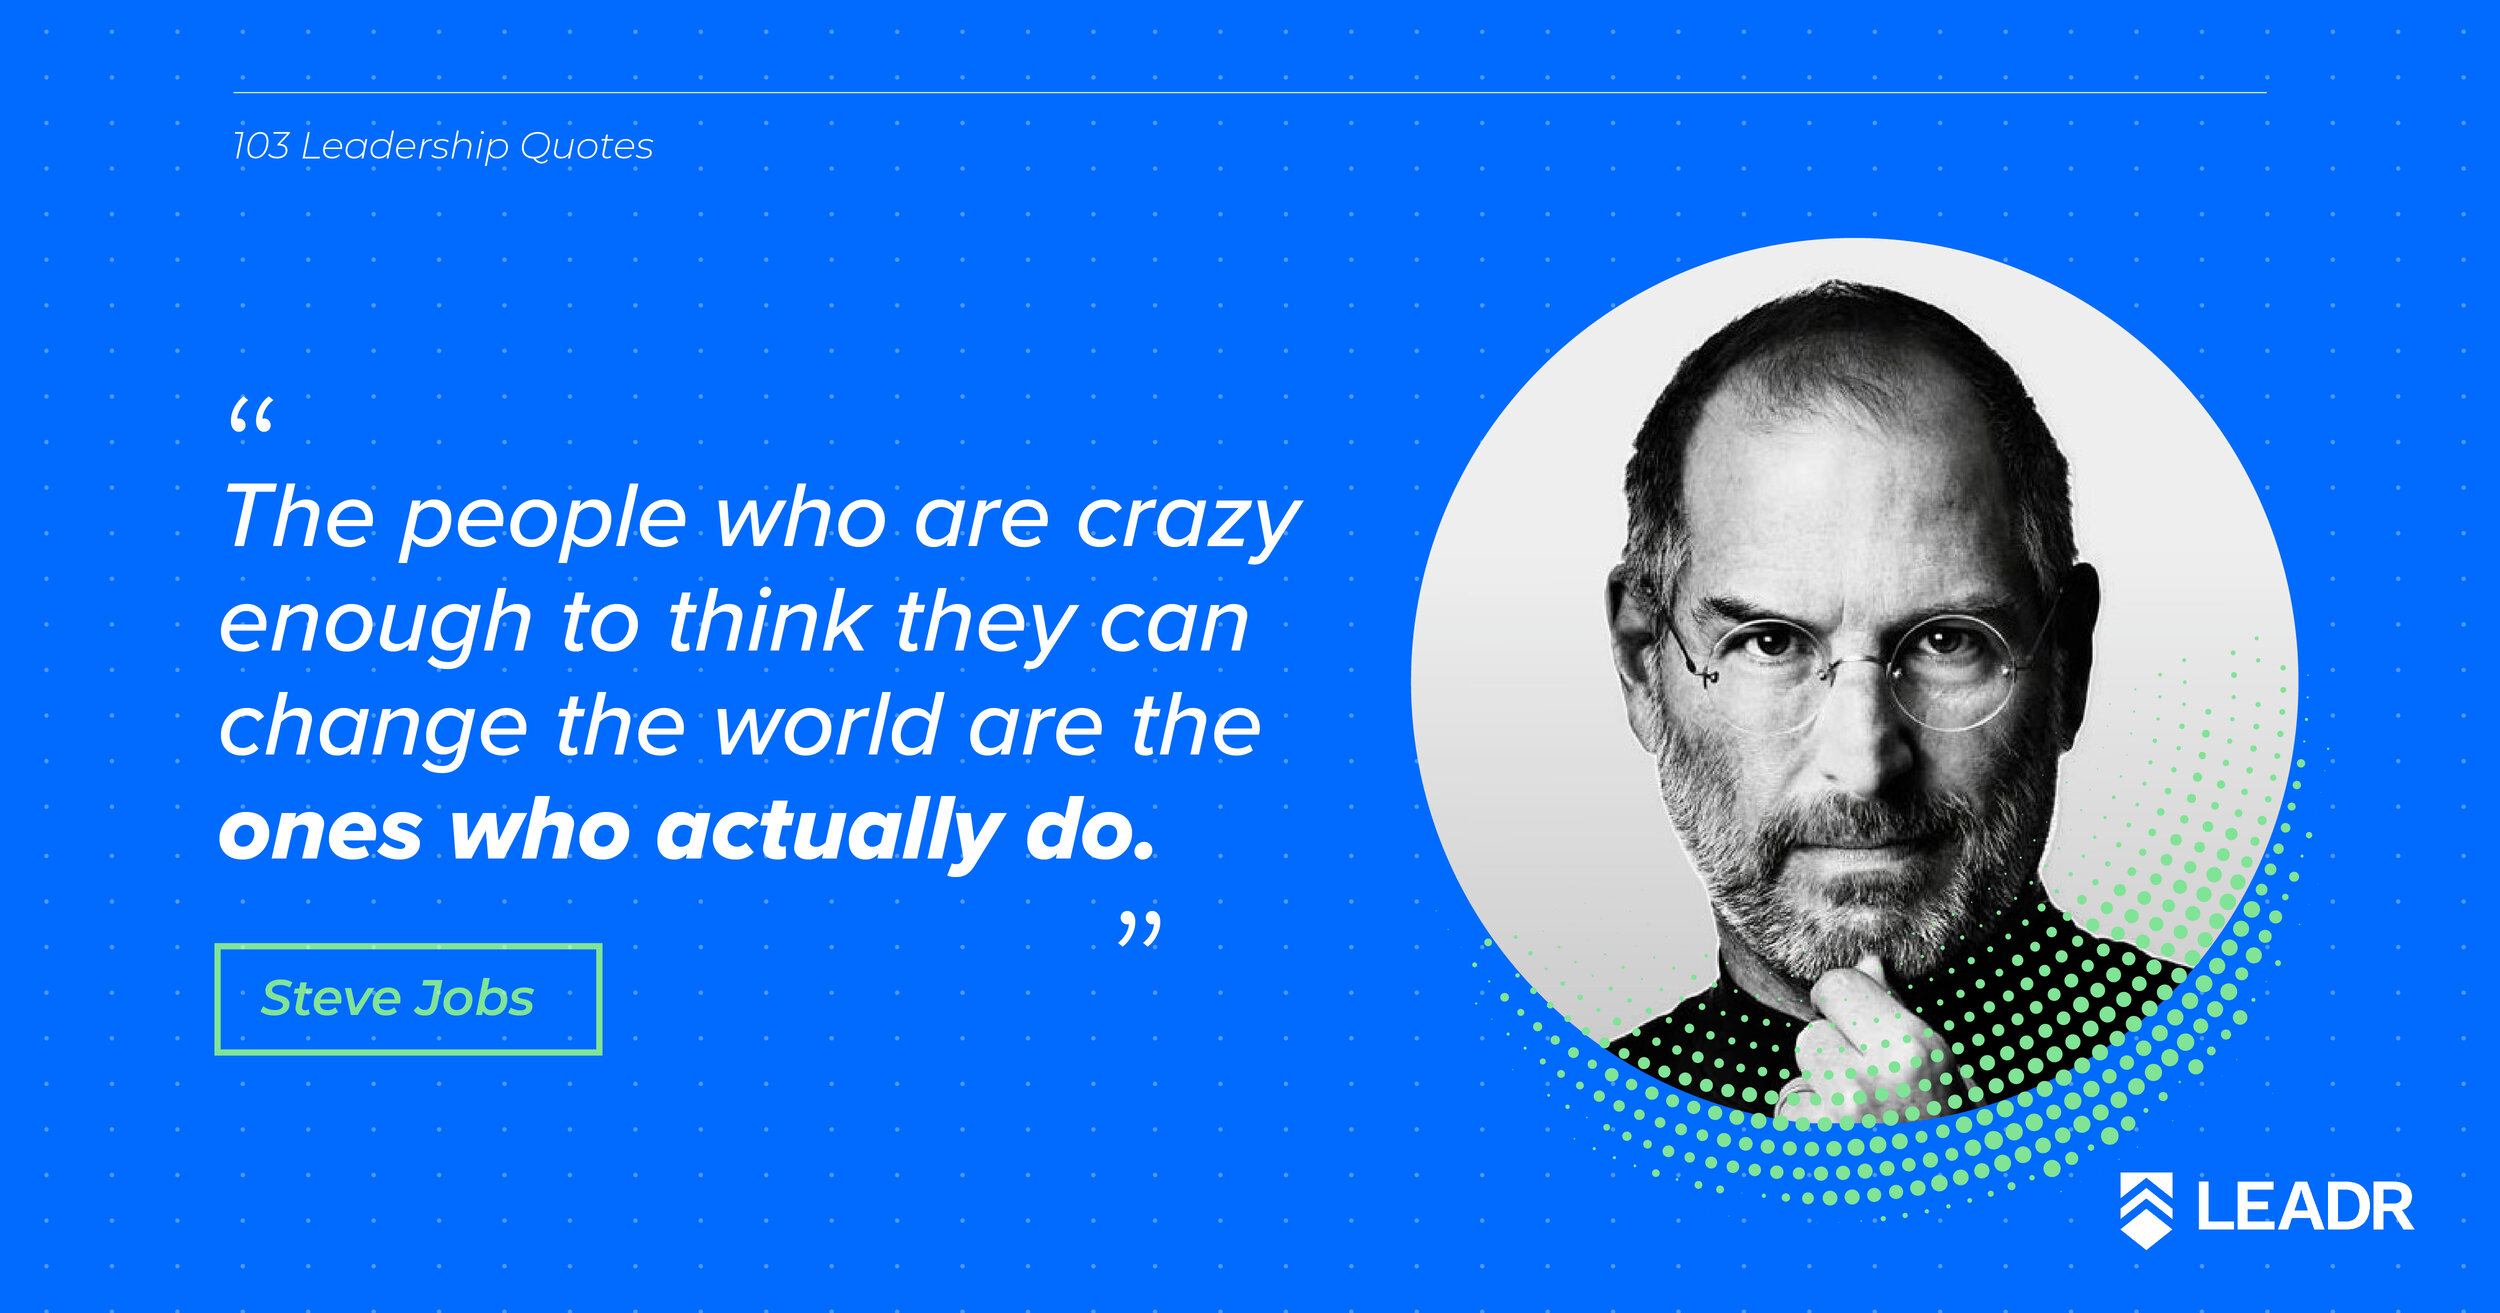 Royalty free downloadable leadership quotes - Steve Jobs